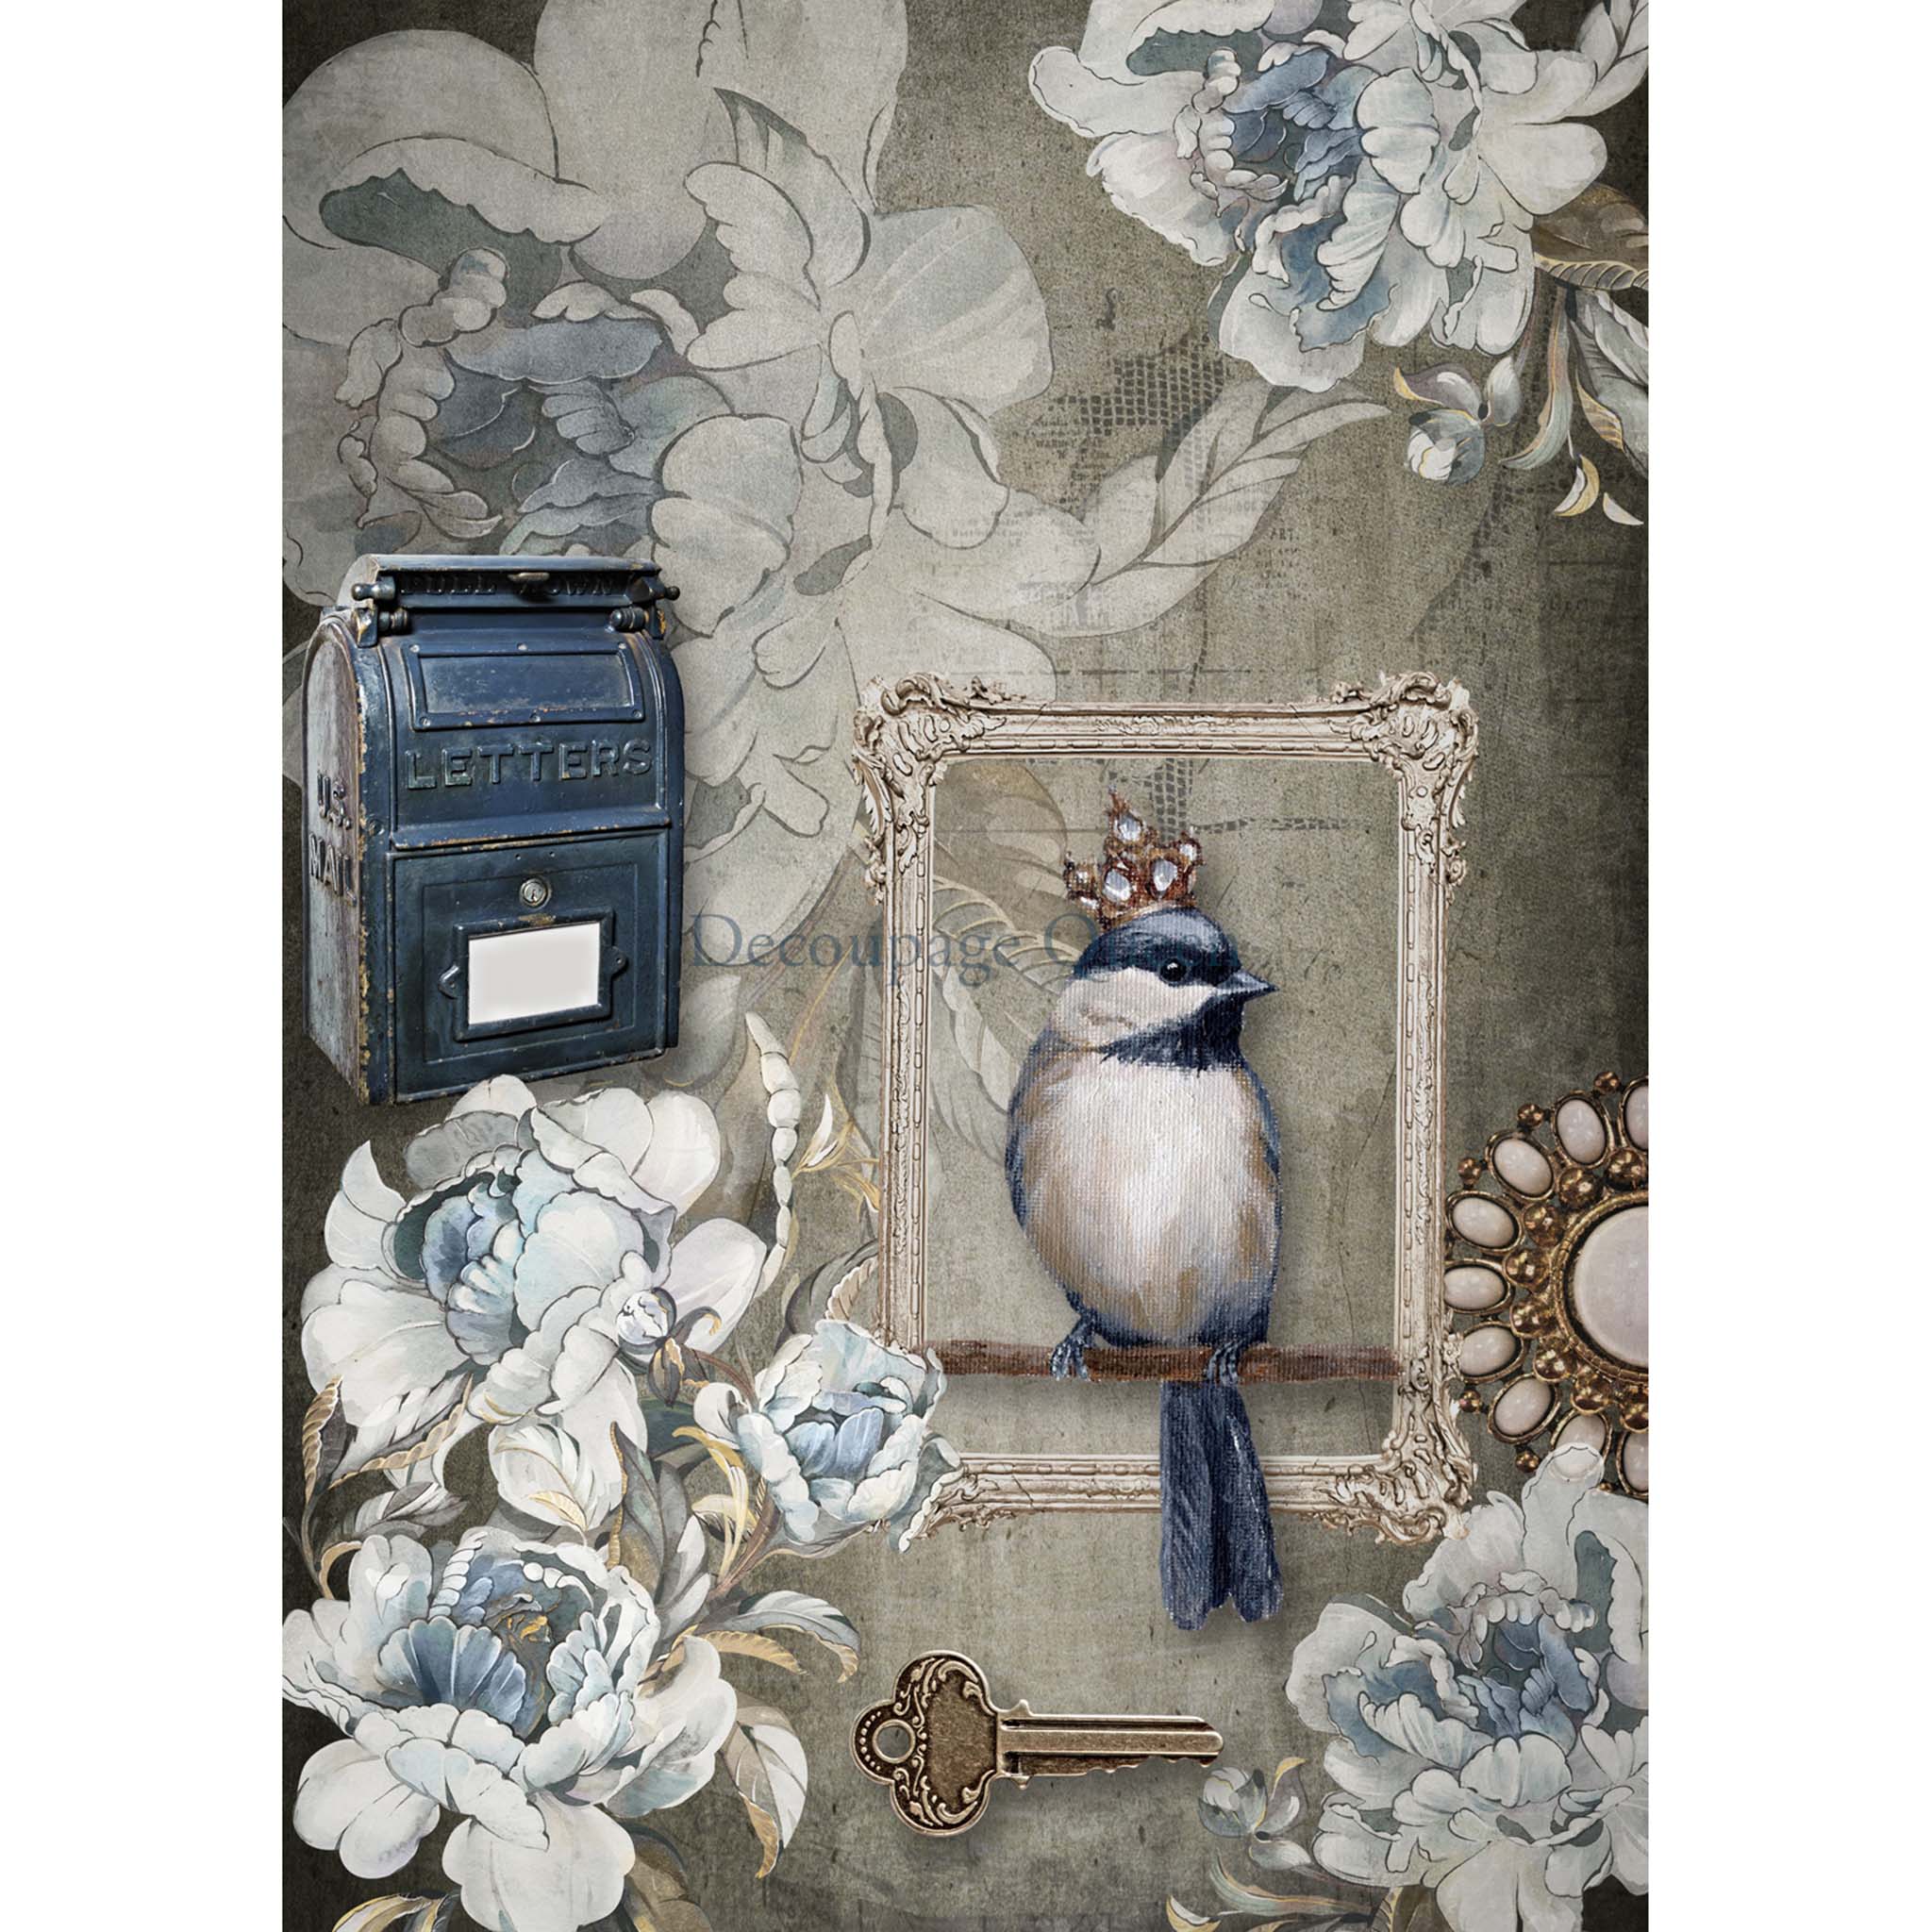 A3 rice paper design that features a distressed background behind a nostalgic mailbox, delicate flowers in white and blue, and a regal bird in a picture frame. White borders are on the sides.